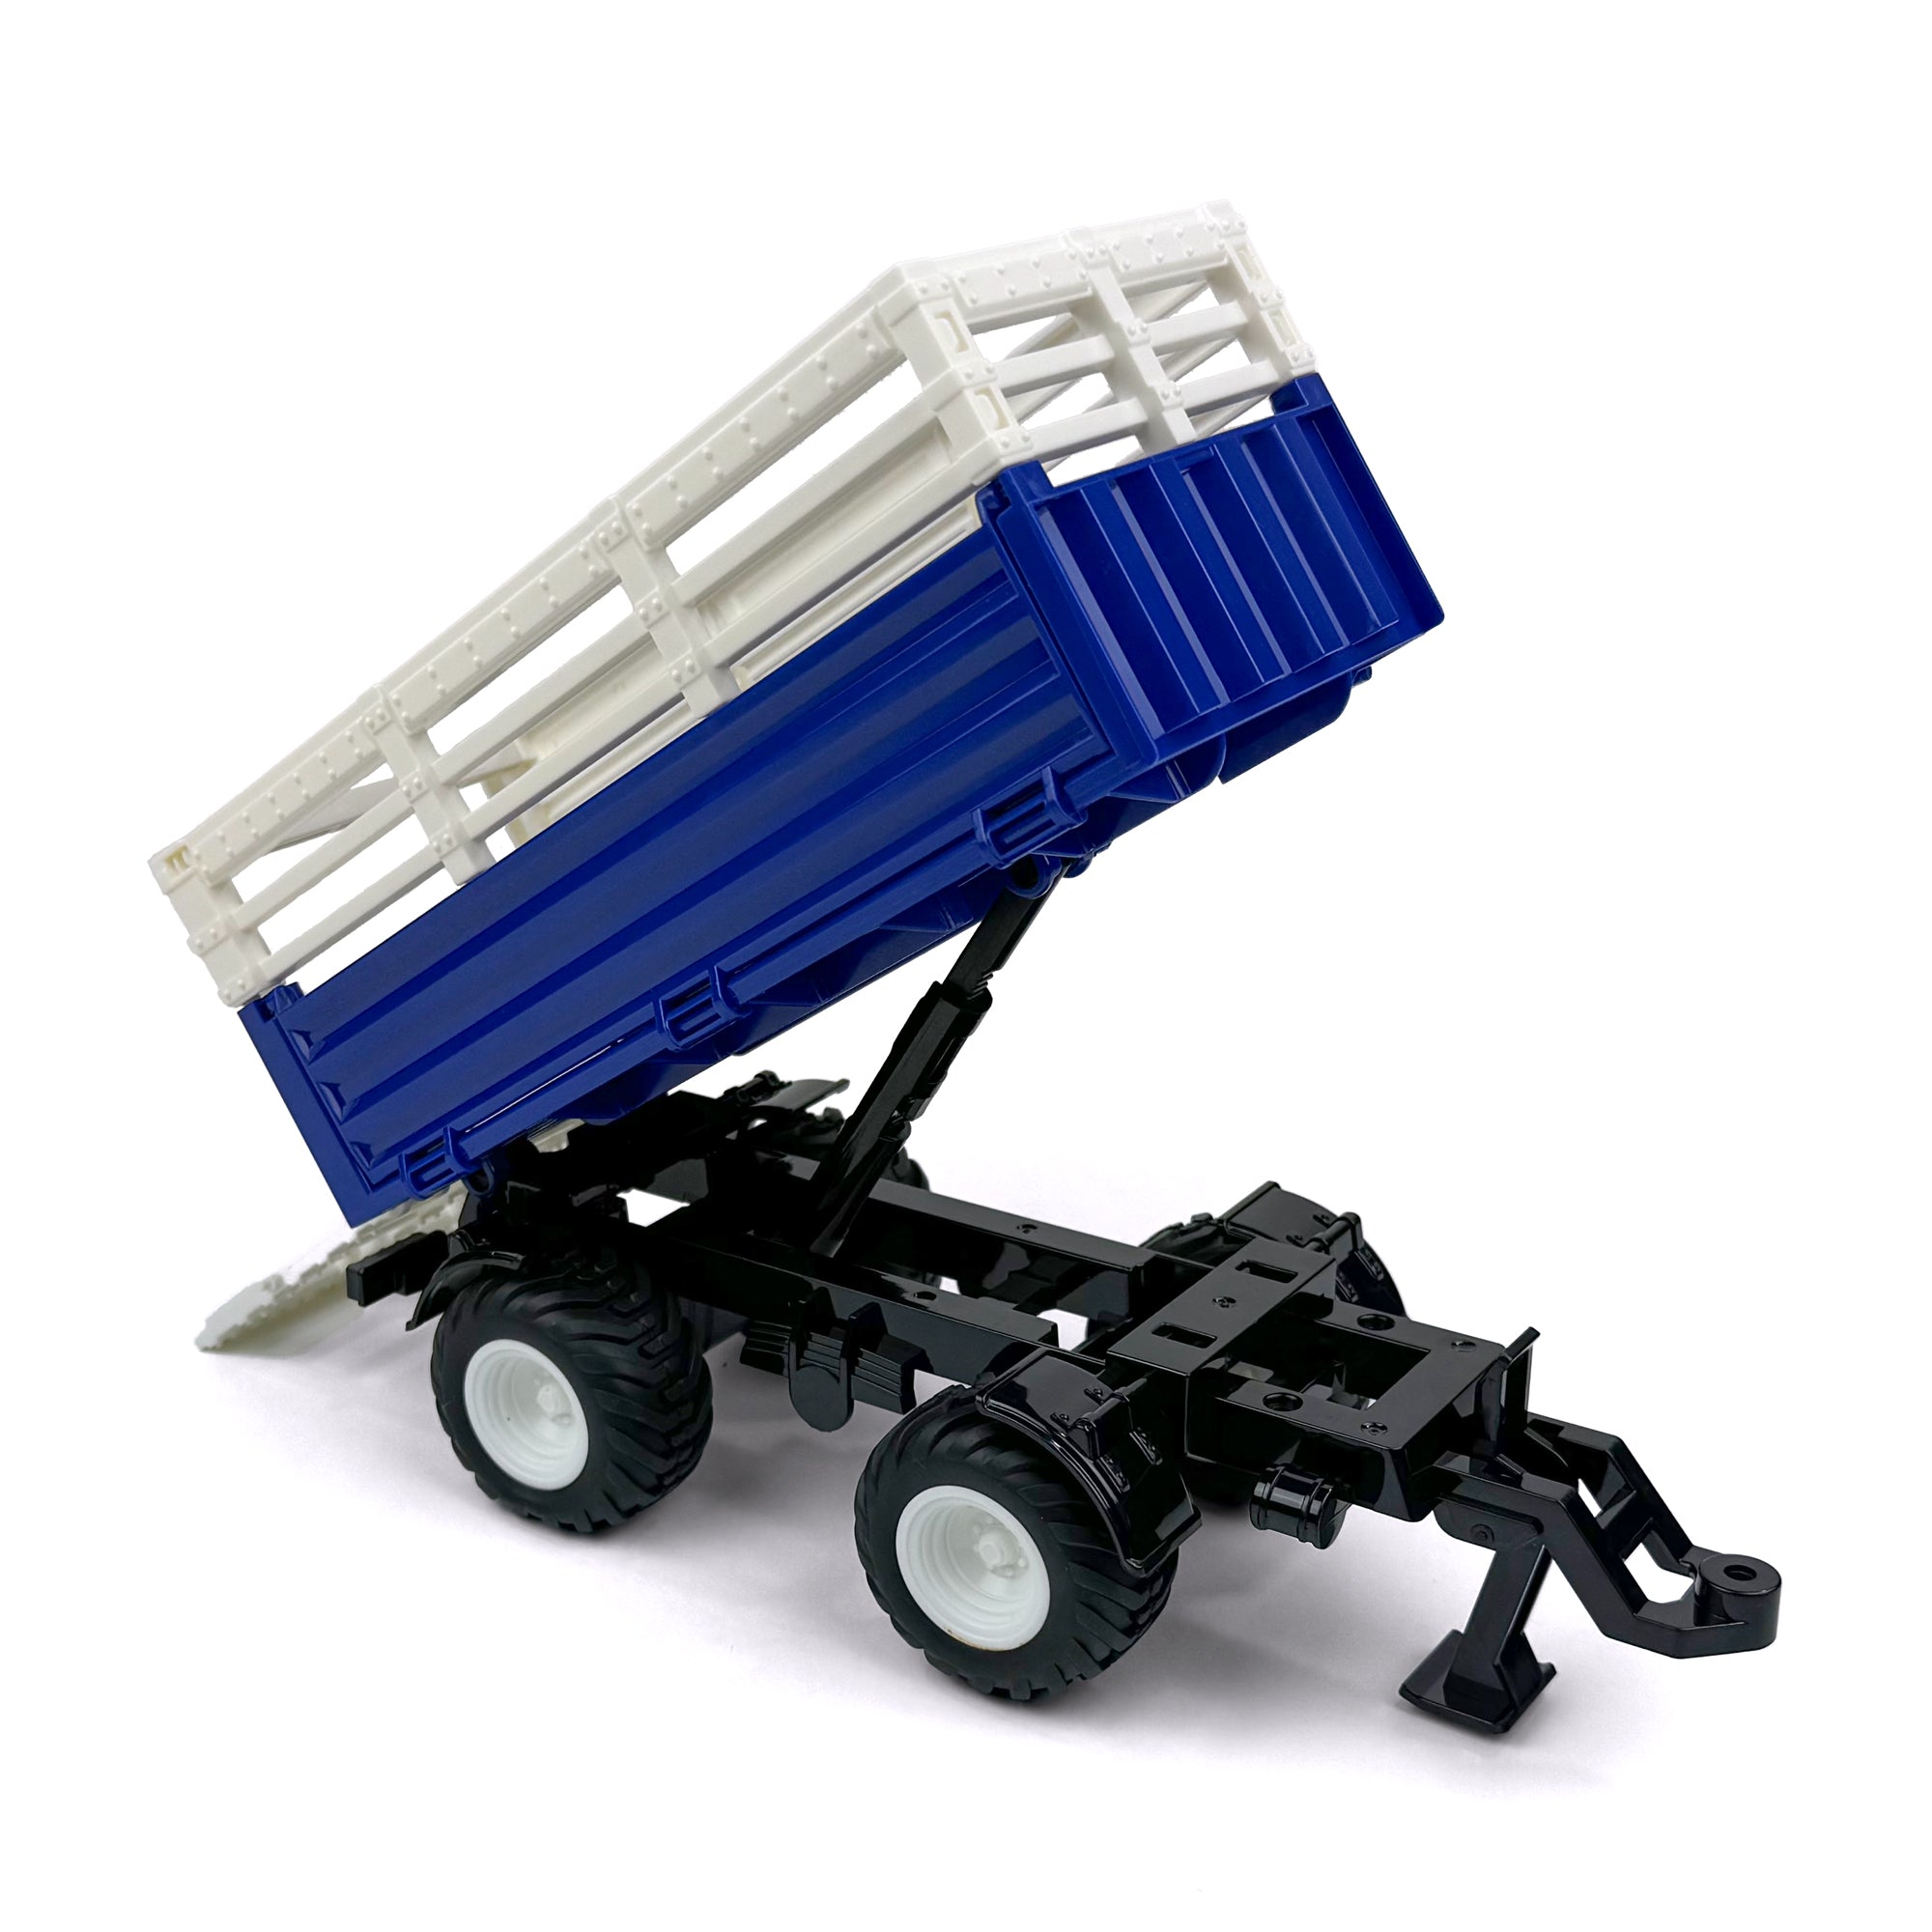 1:24 Scale R/C Tractor & Trailer Combo | bigcountrytoys.com